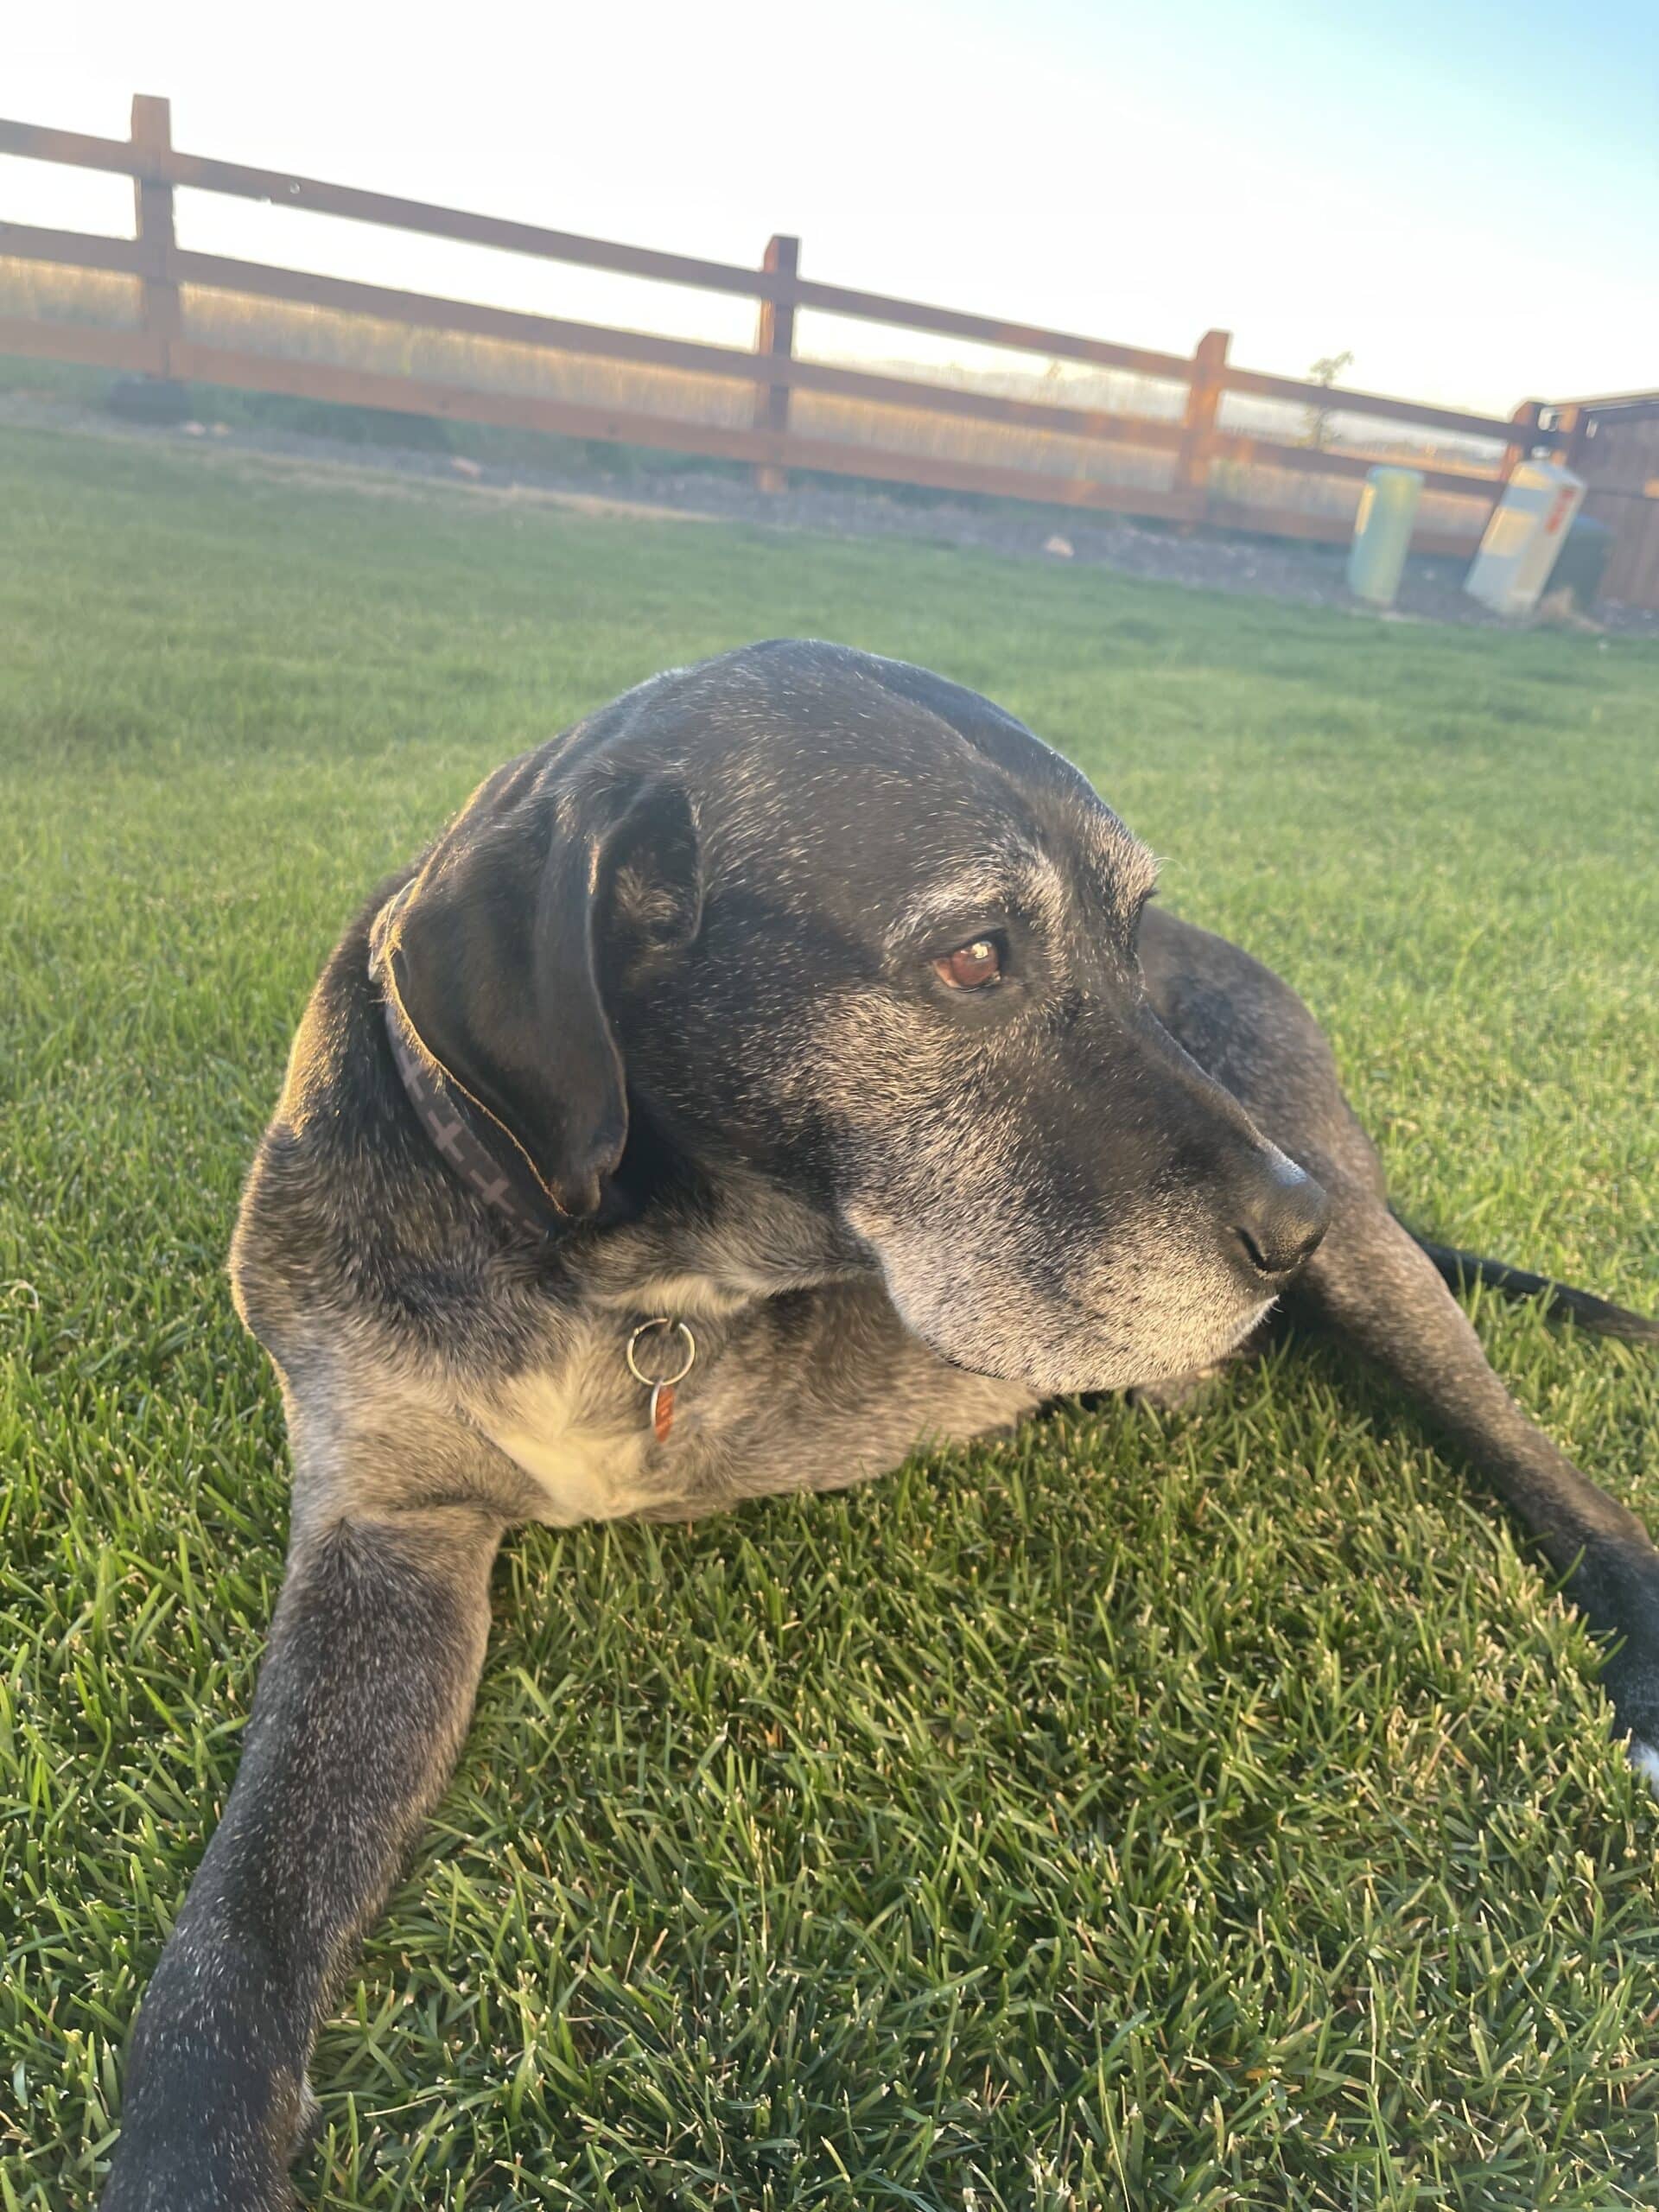 Jake is an (approximately) 8-year-old, 70-lb Great Dane-Labrador mix